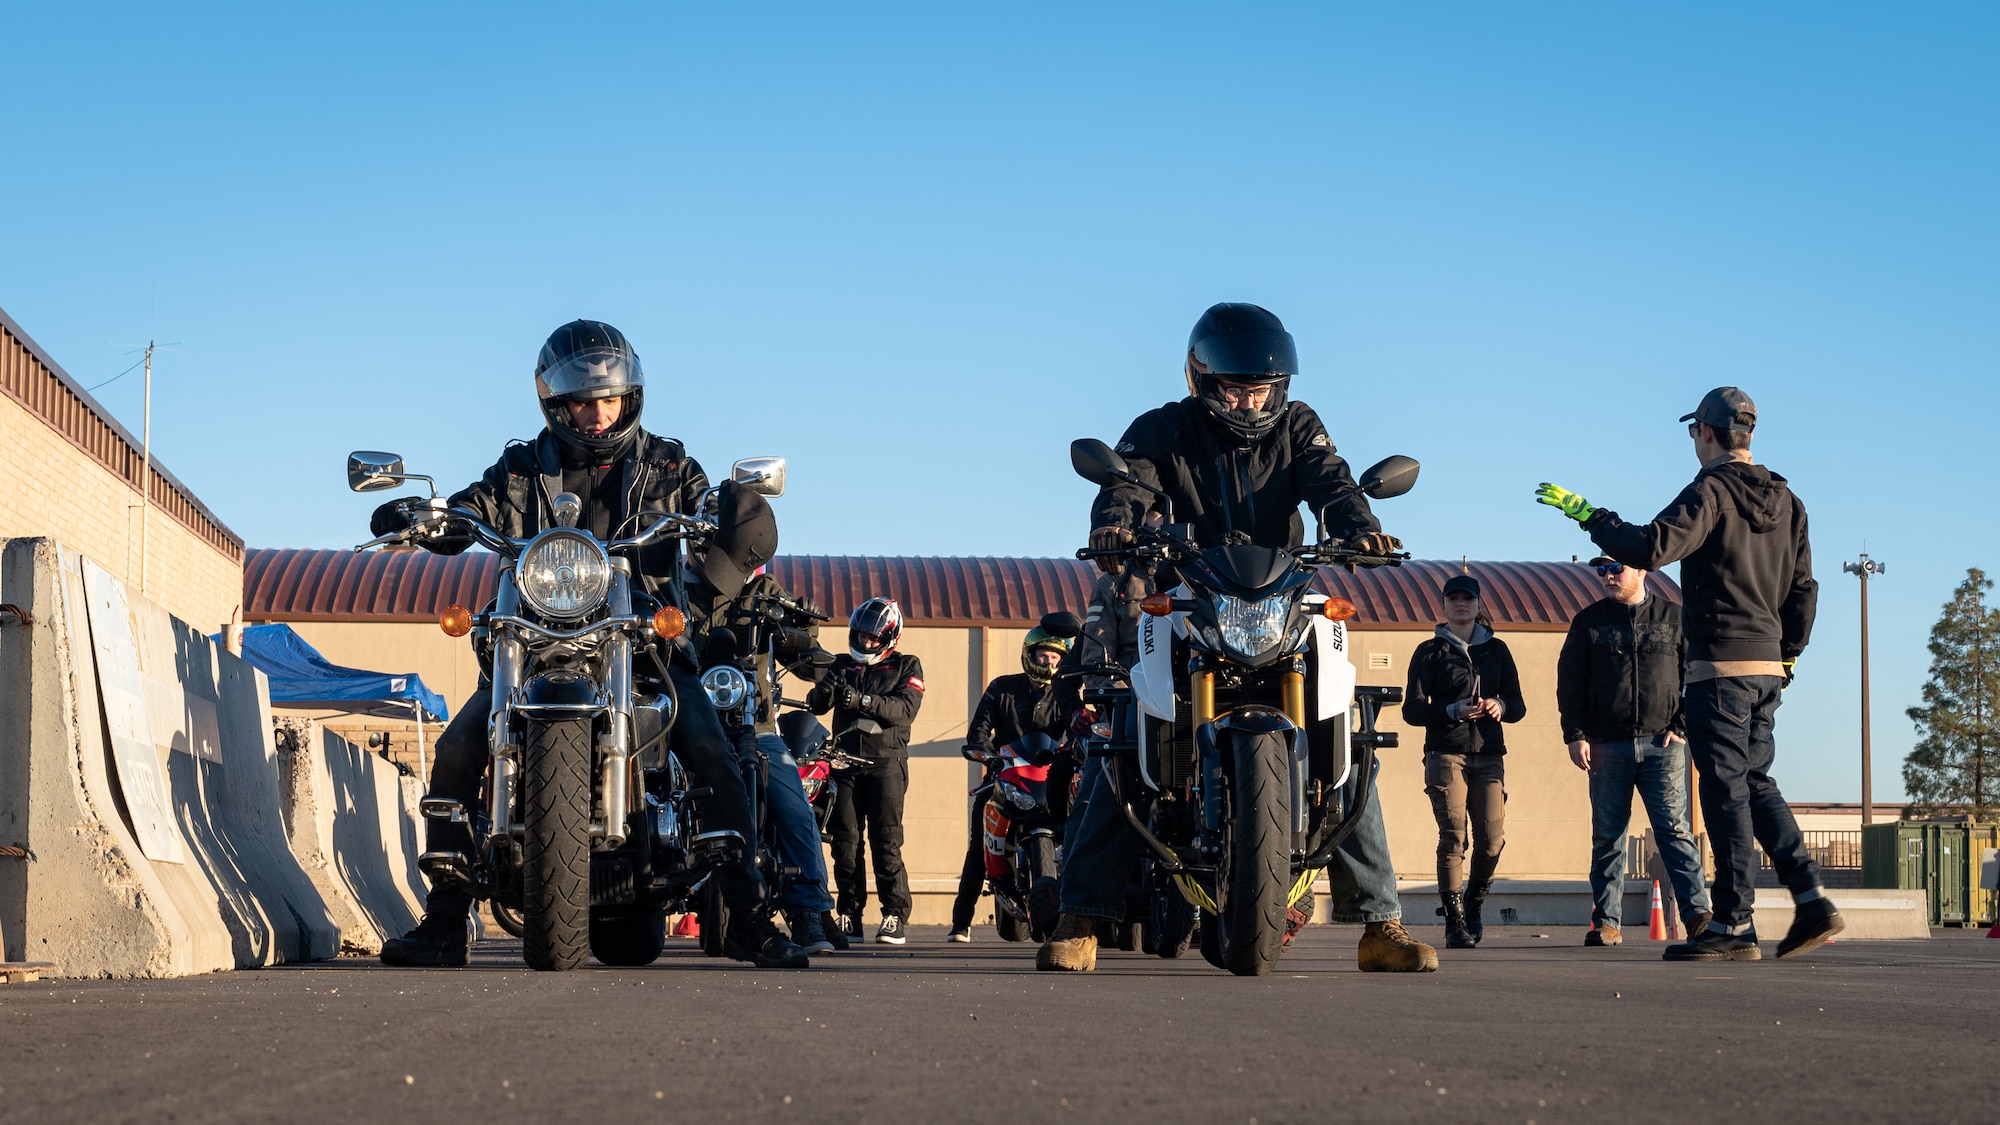 Tech. Sgt. Maximilian Wyckoff, rider coach, gives a briefing during a motorcycle safety course, Feb. 16, 2024, at Luke Air Force Base, Arizona.